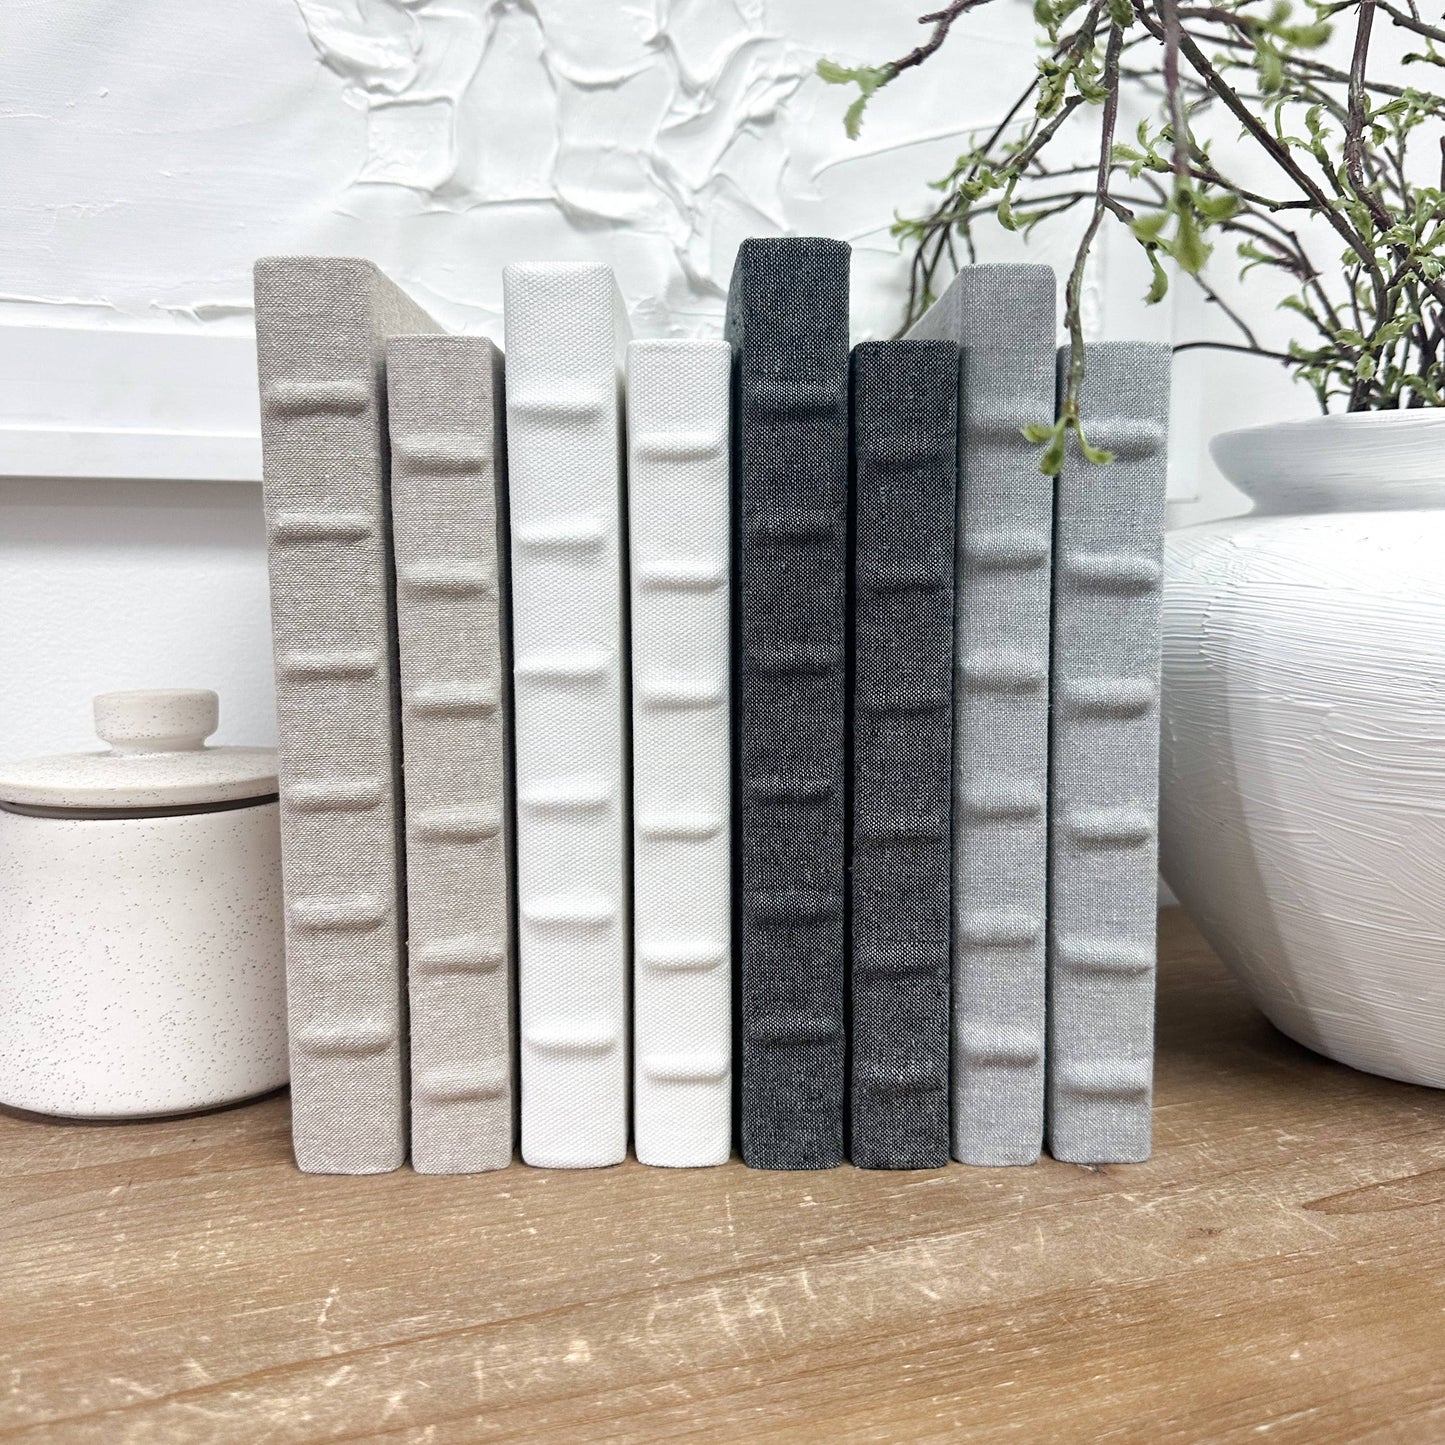 Decorative Book for Shelf Decor -Charcoal Linen Covered